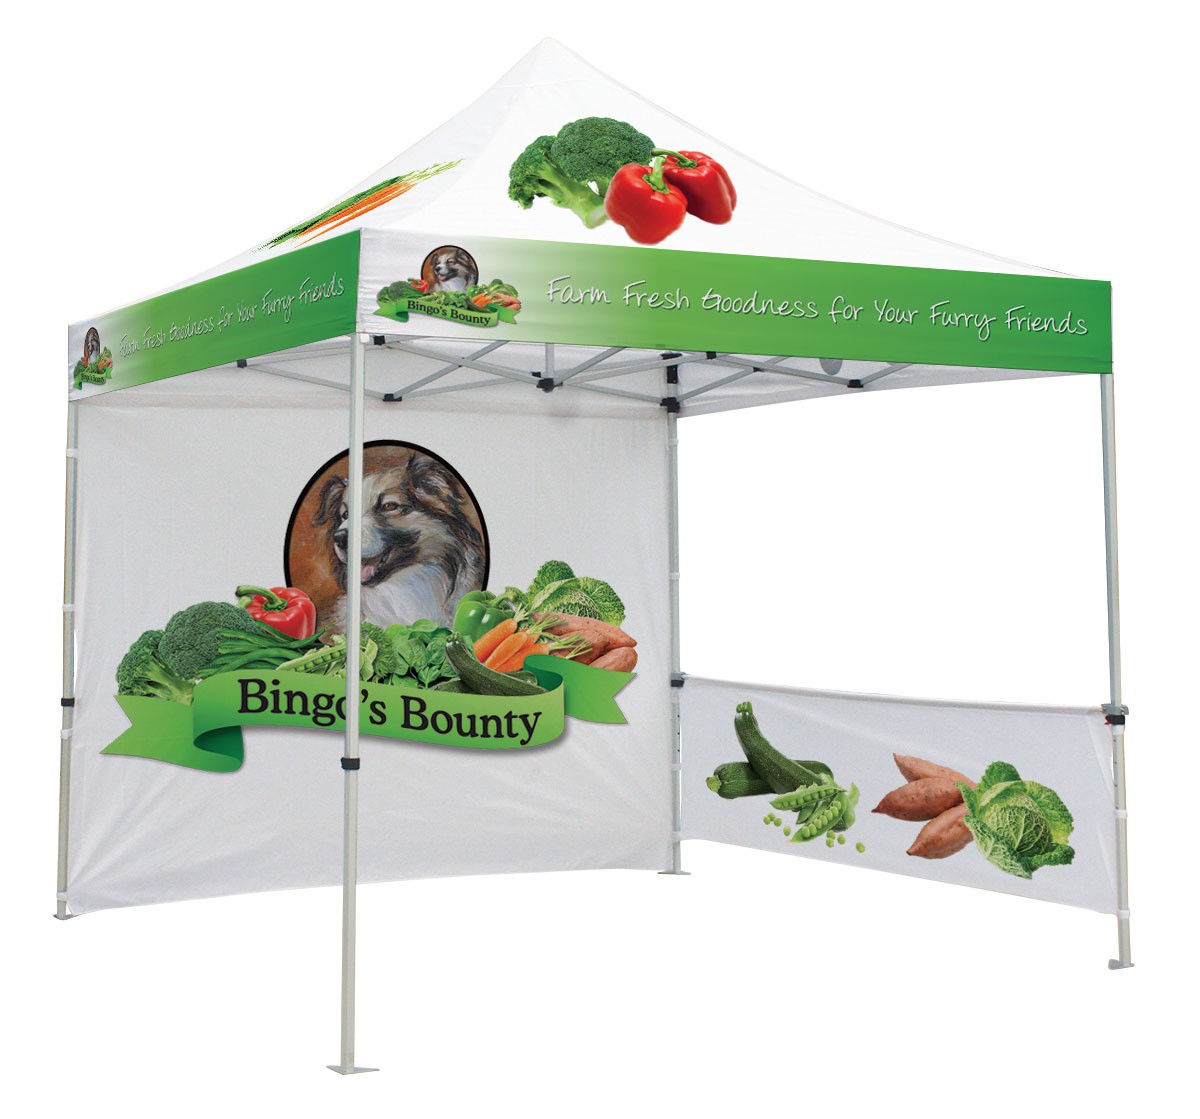 Canopy Tent Kit will full custom printed top and walls